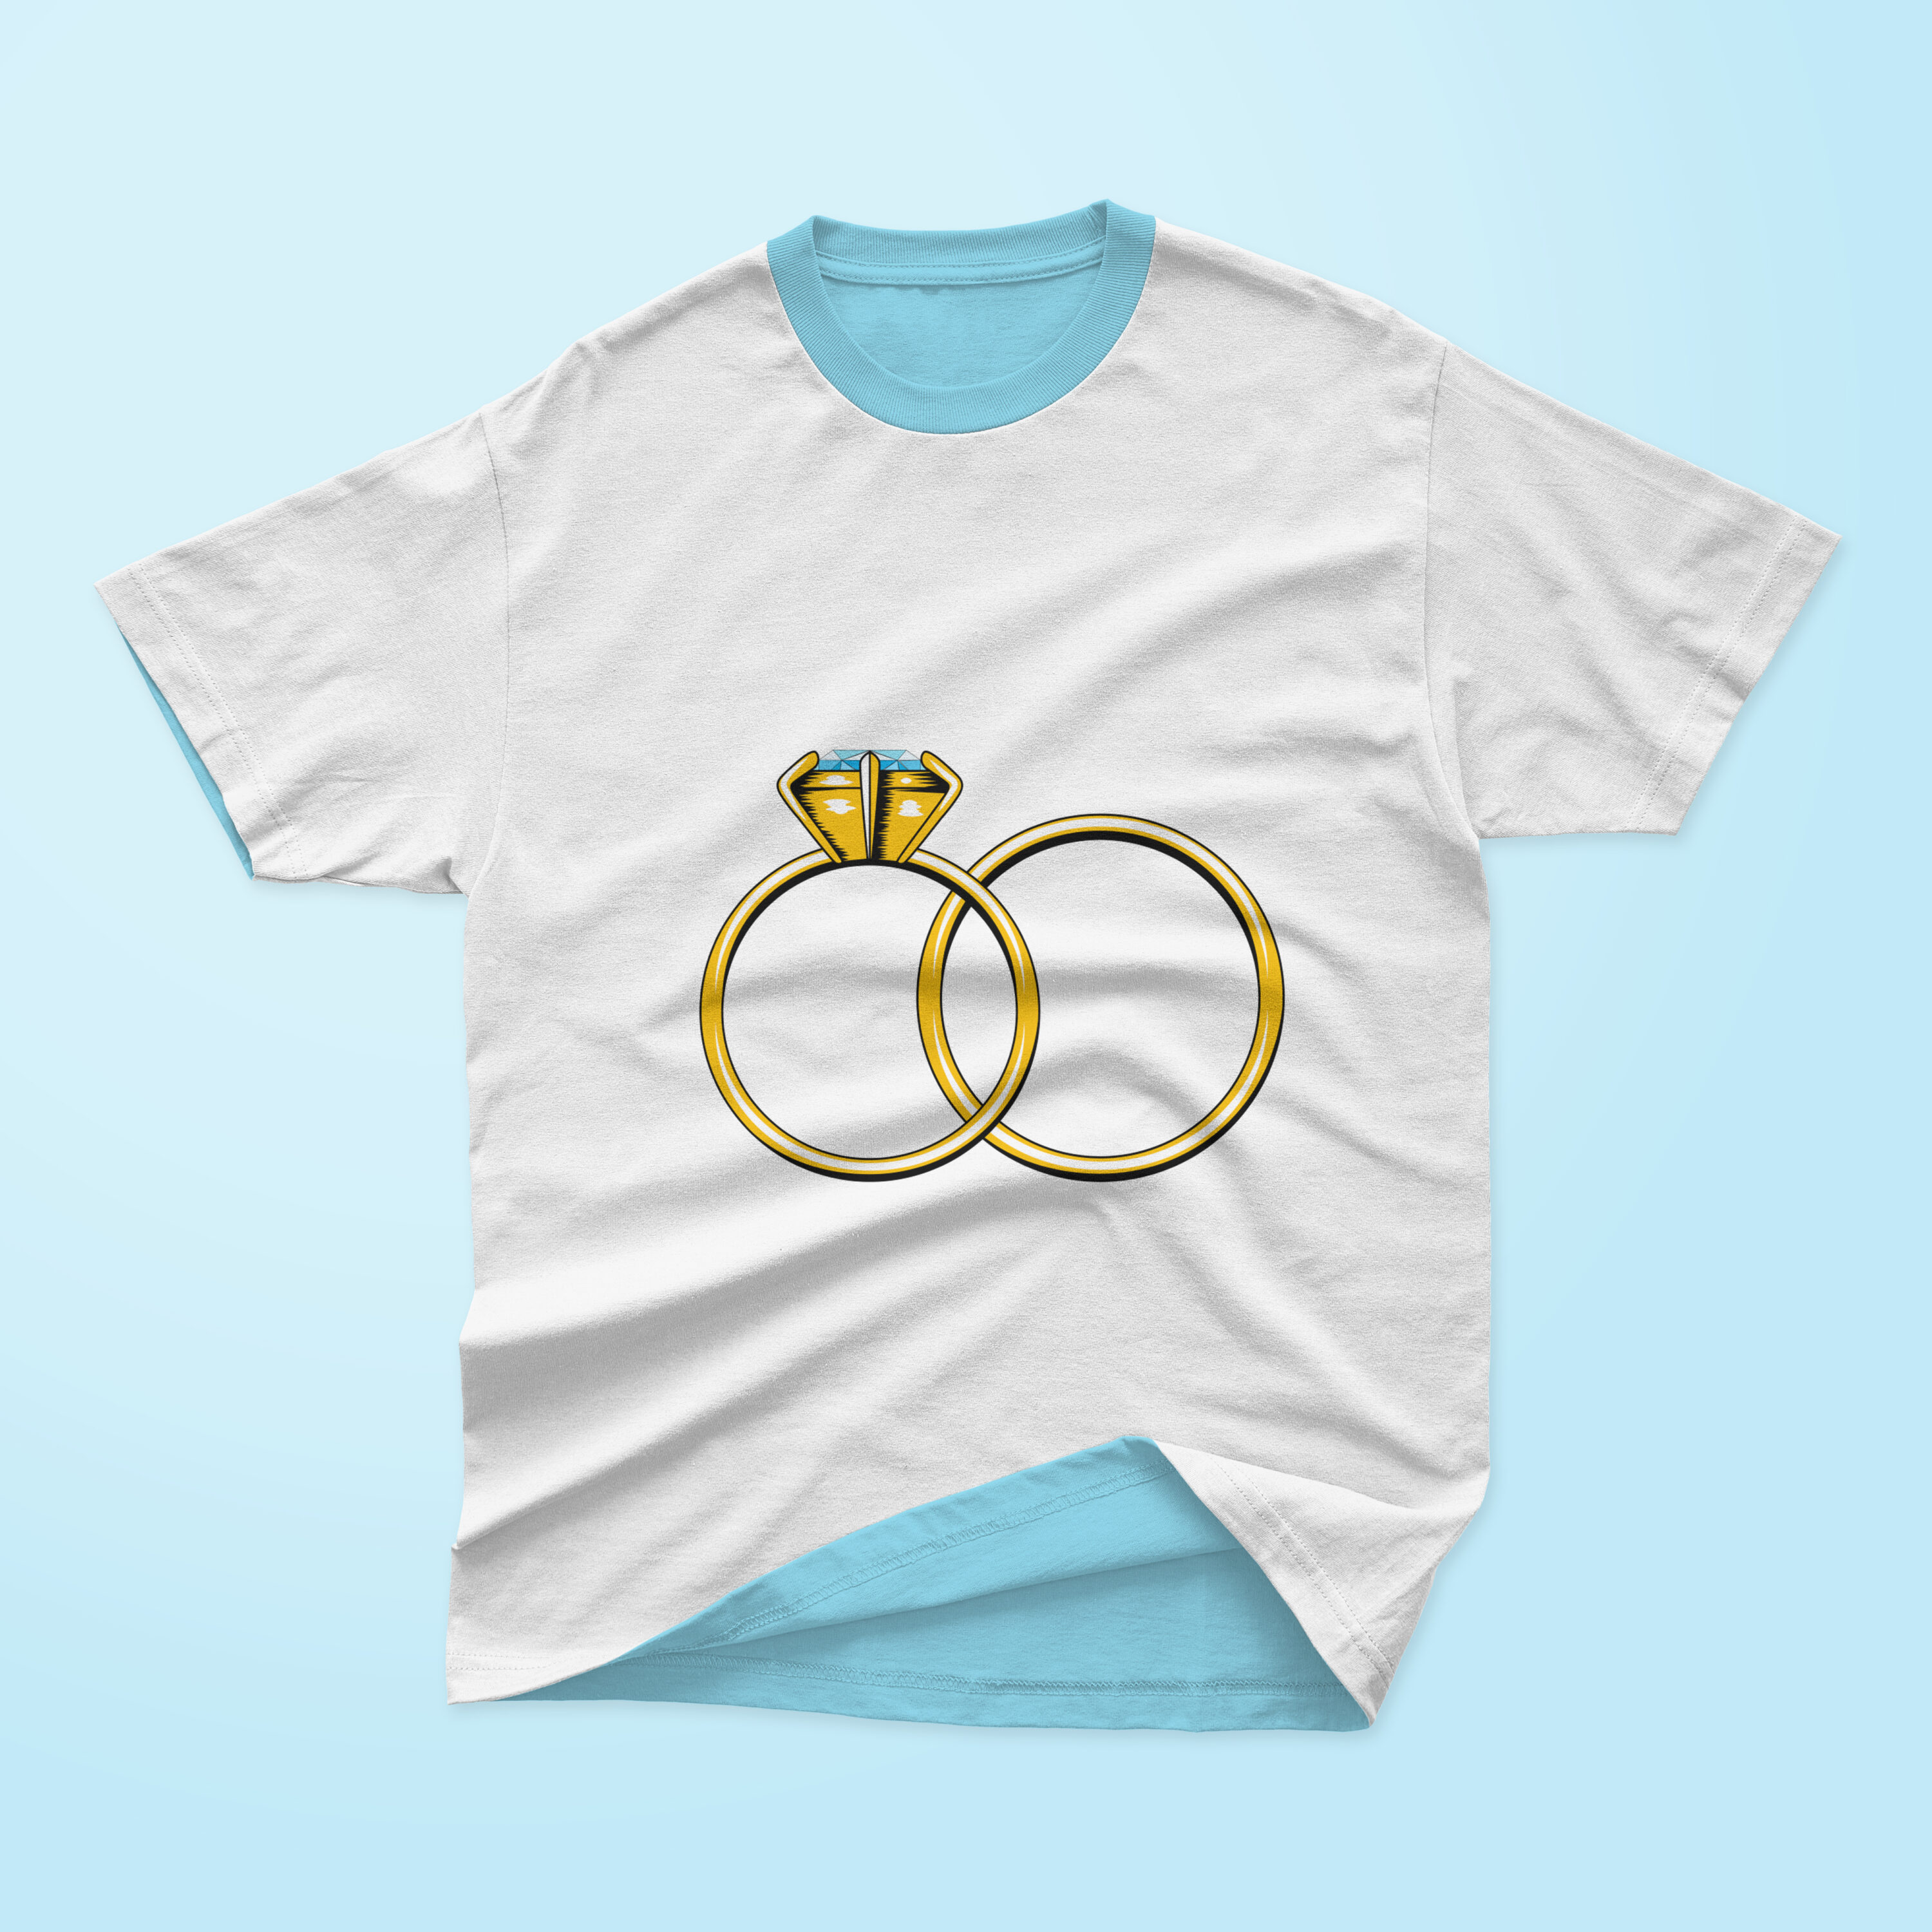 Picture of T-shirt with wonderful print of diamond engagement rings.